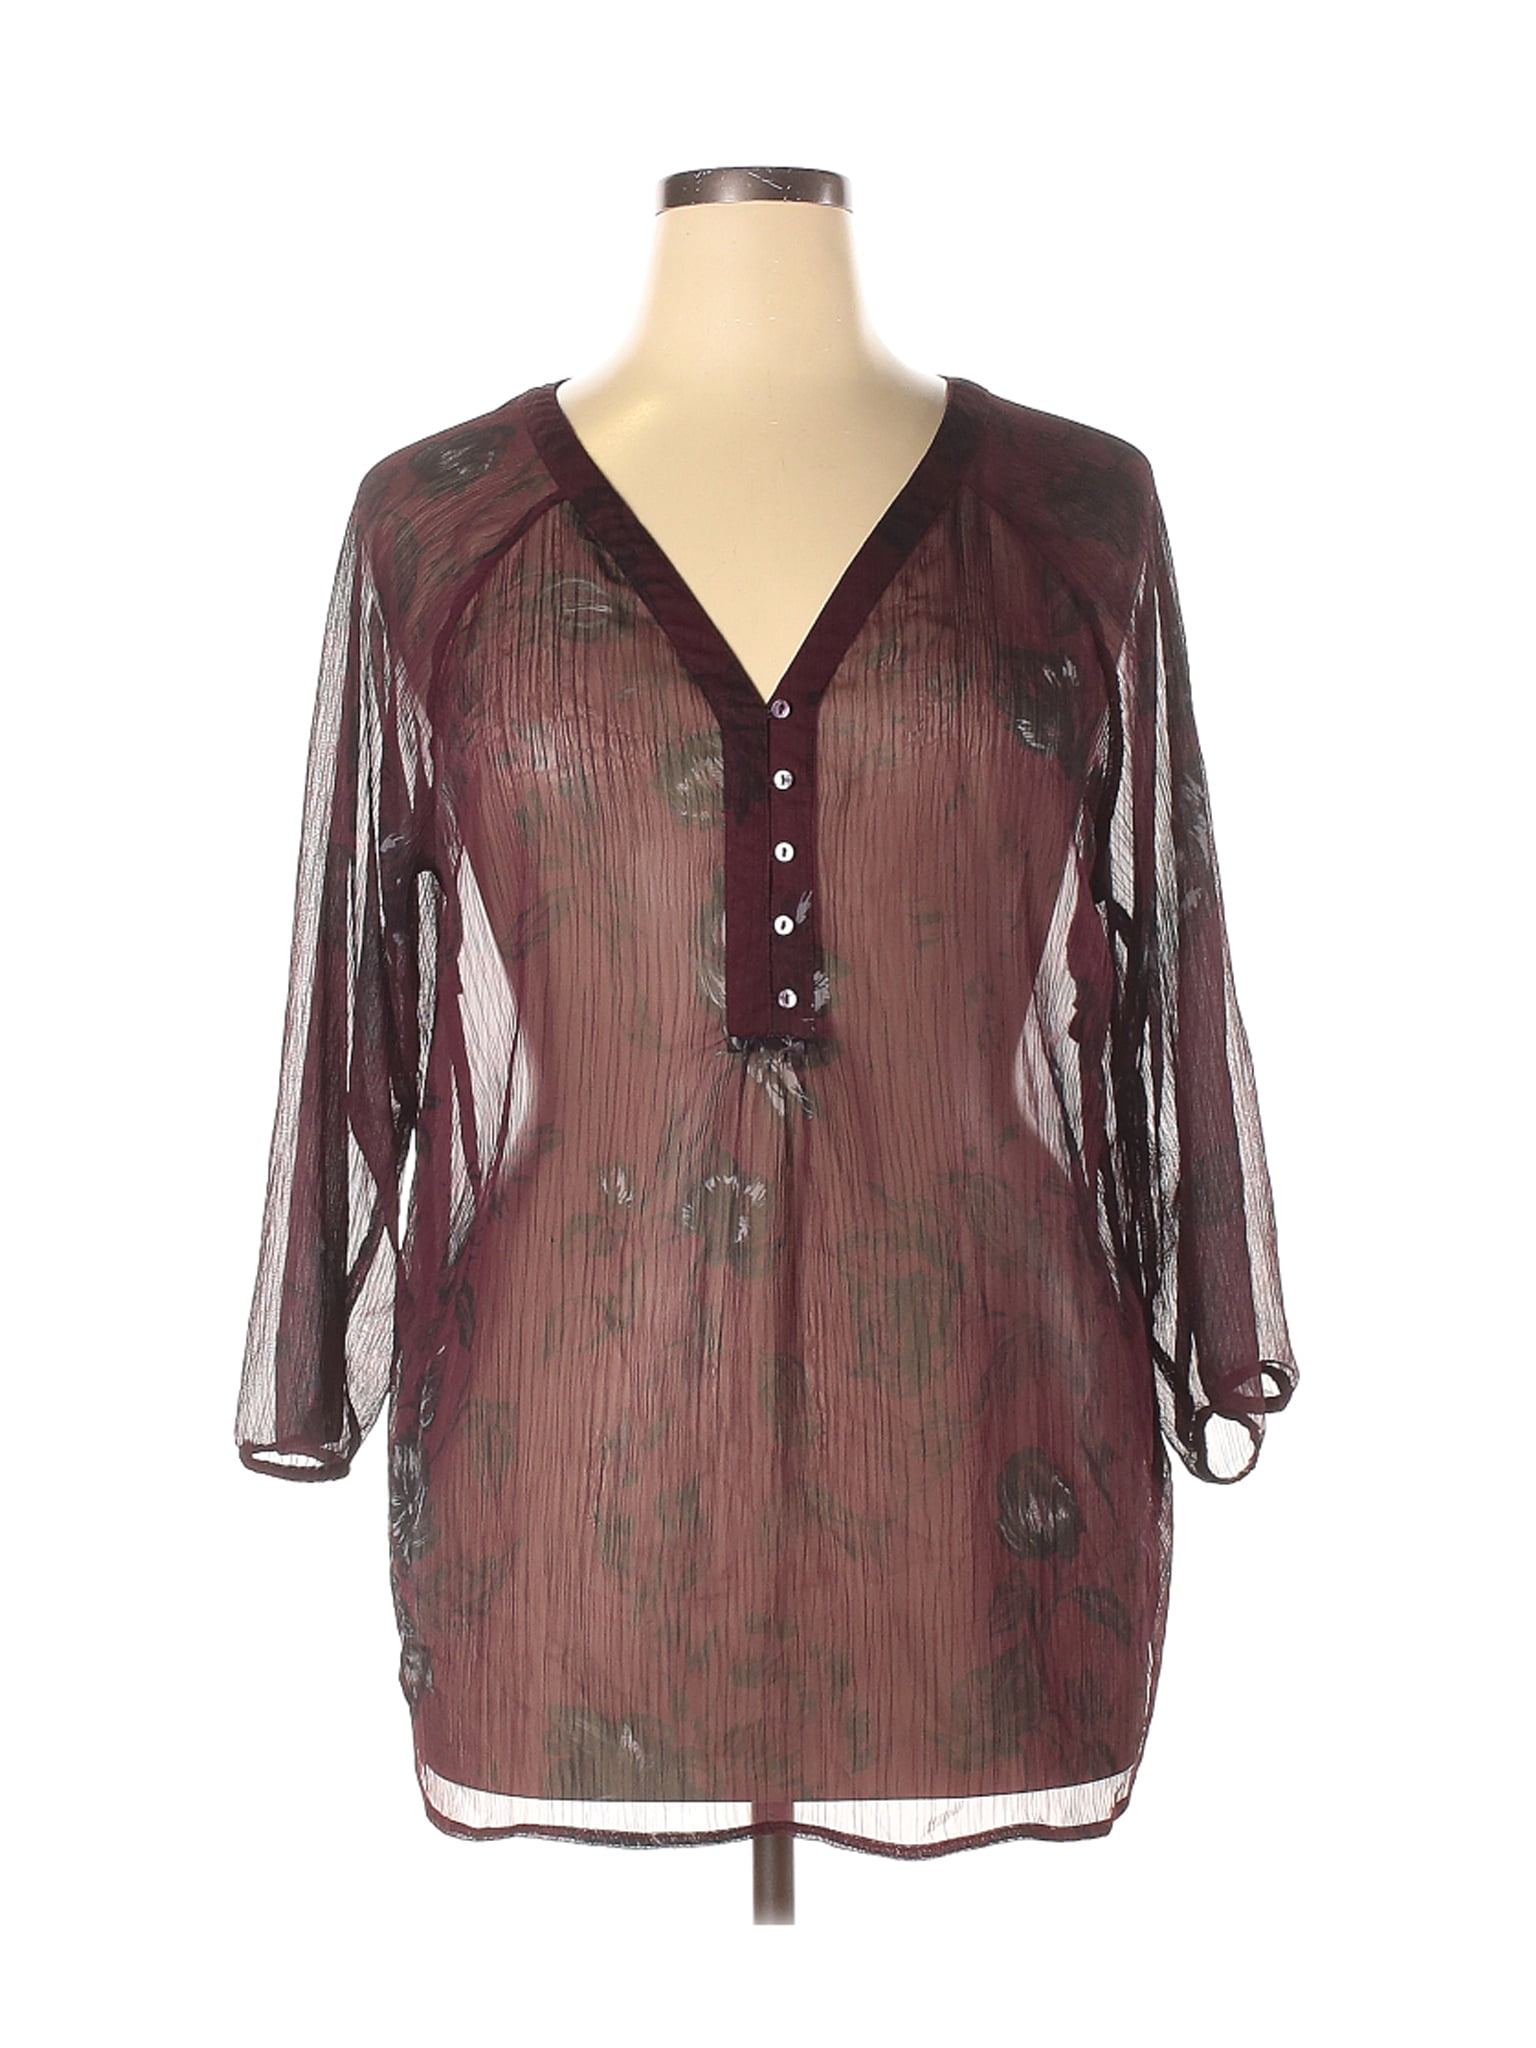 maurices - Pre-Owned Maurices Women's Size 16 3/4 Sleeve Blouse ...